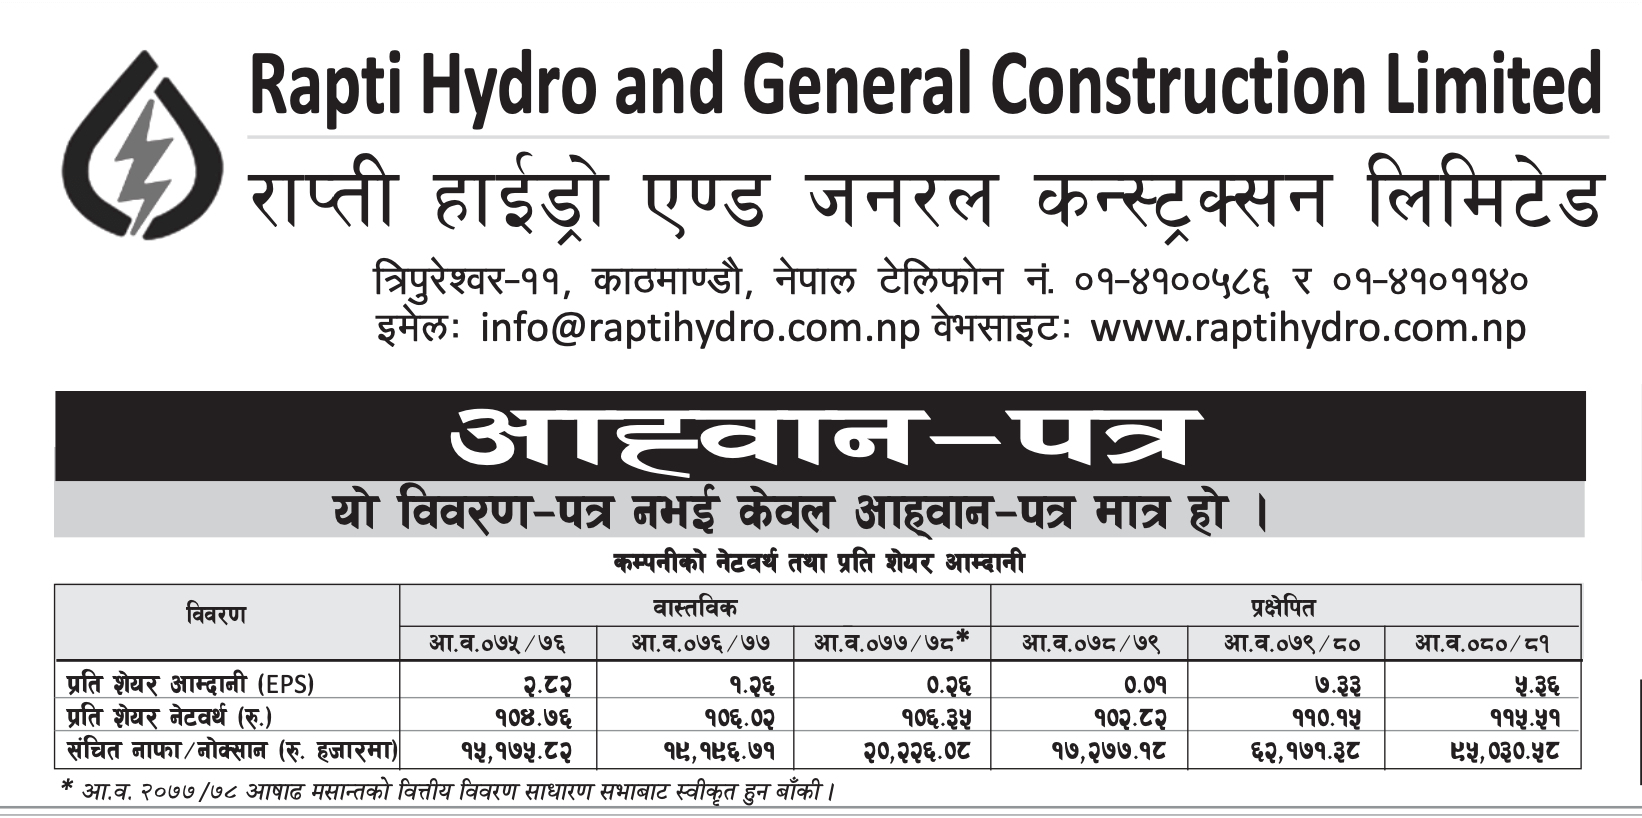 opening price range of rapti hydro and general construction